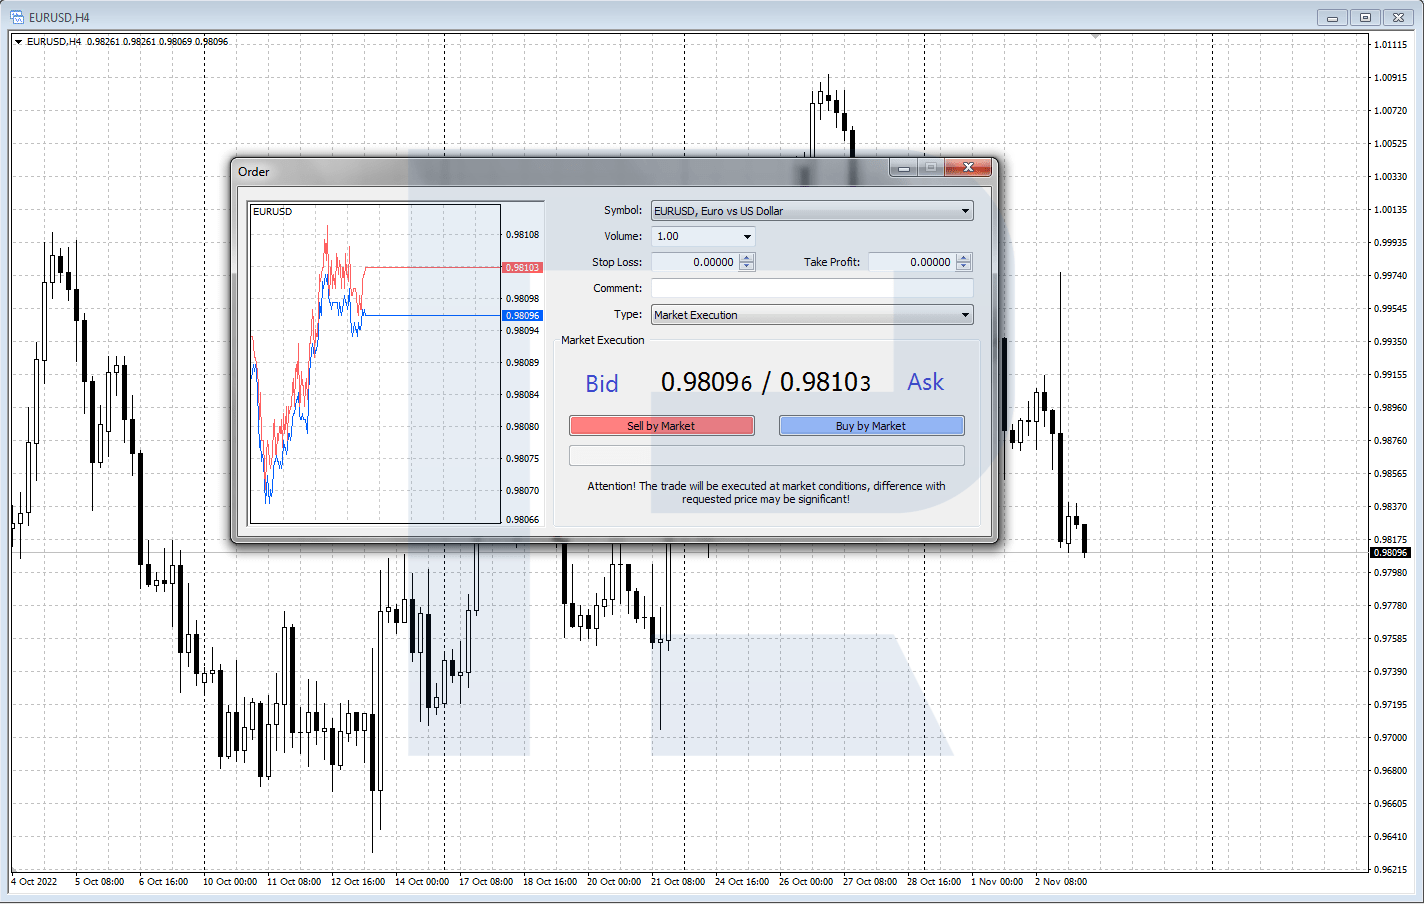 Bid and Ask prices for EUR/USD